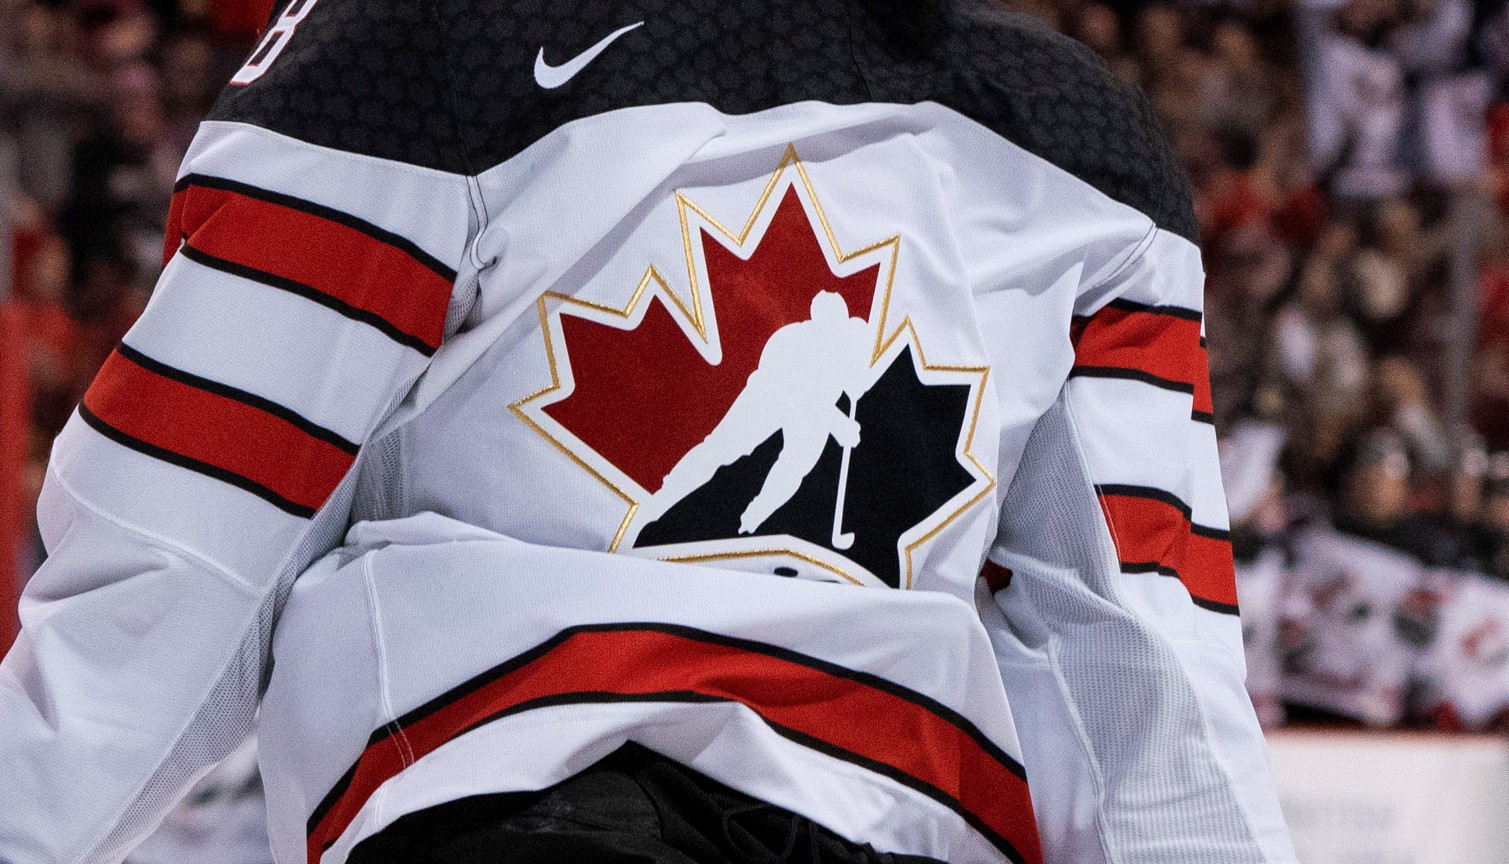 Nike was among the sponsors that refused to support Hockey Canada following revelations of the sexual assault scandal ©Getty Images